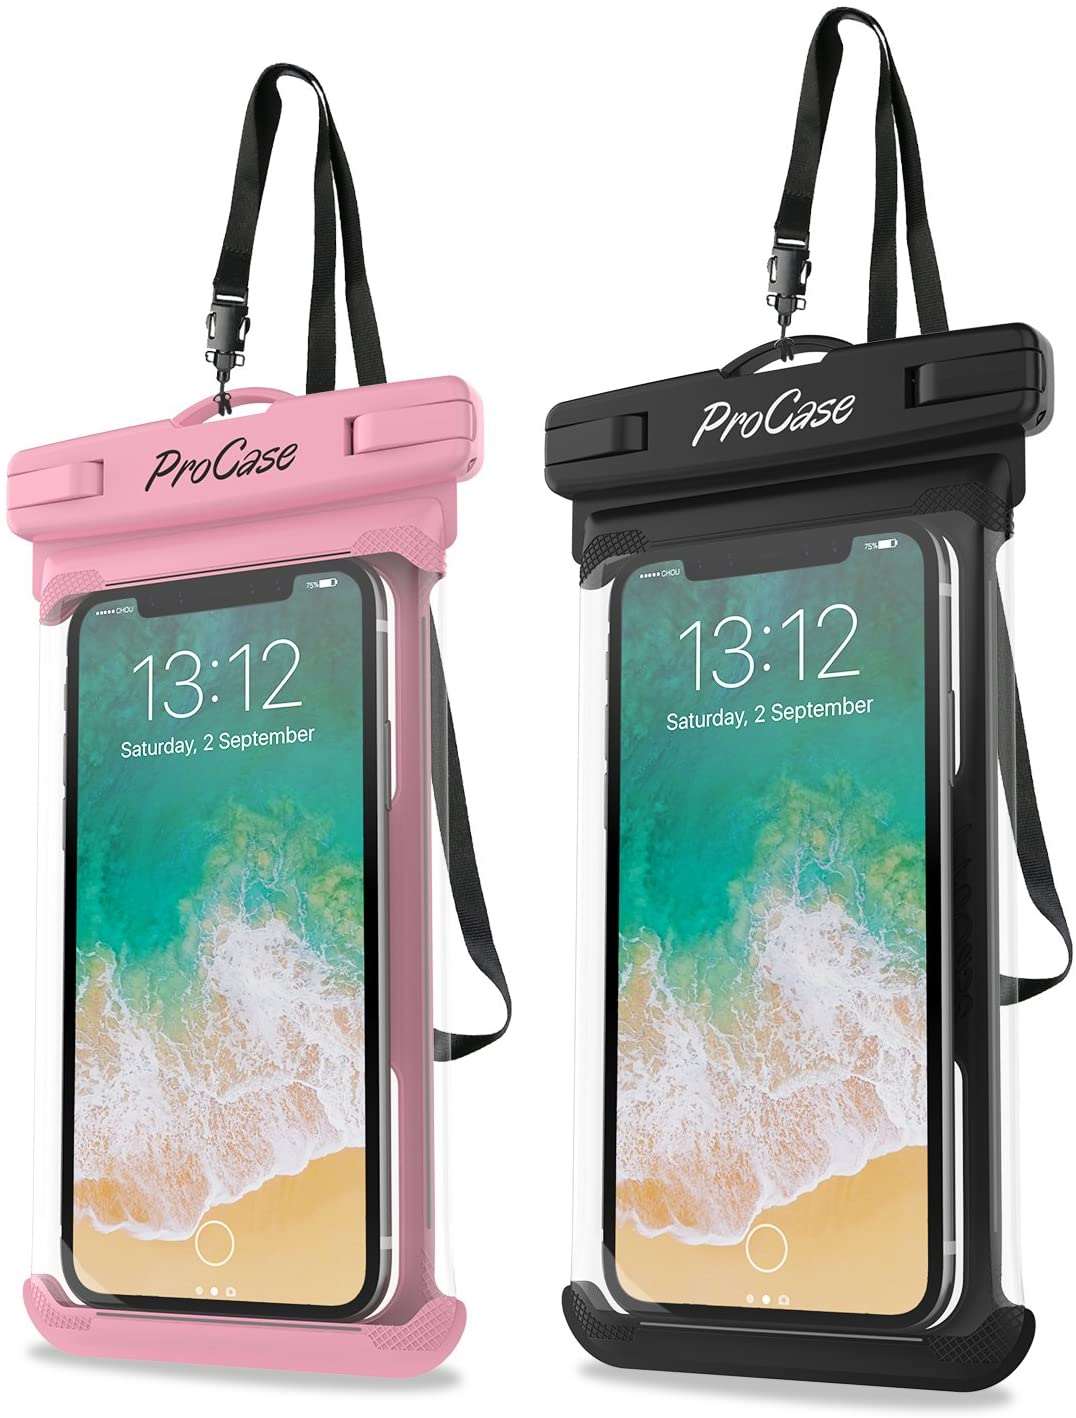 Universal Waterproof Pouch Phone Dry Bag - 2 Pack | ProCase pink+black